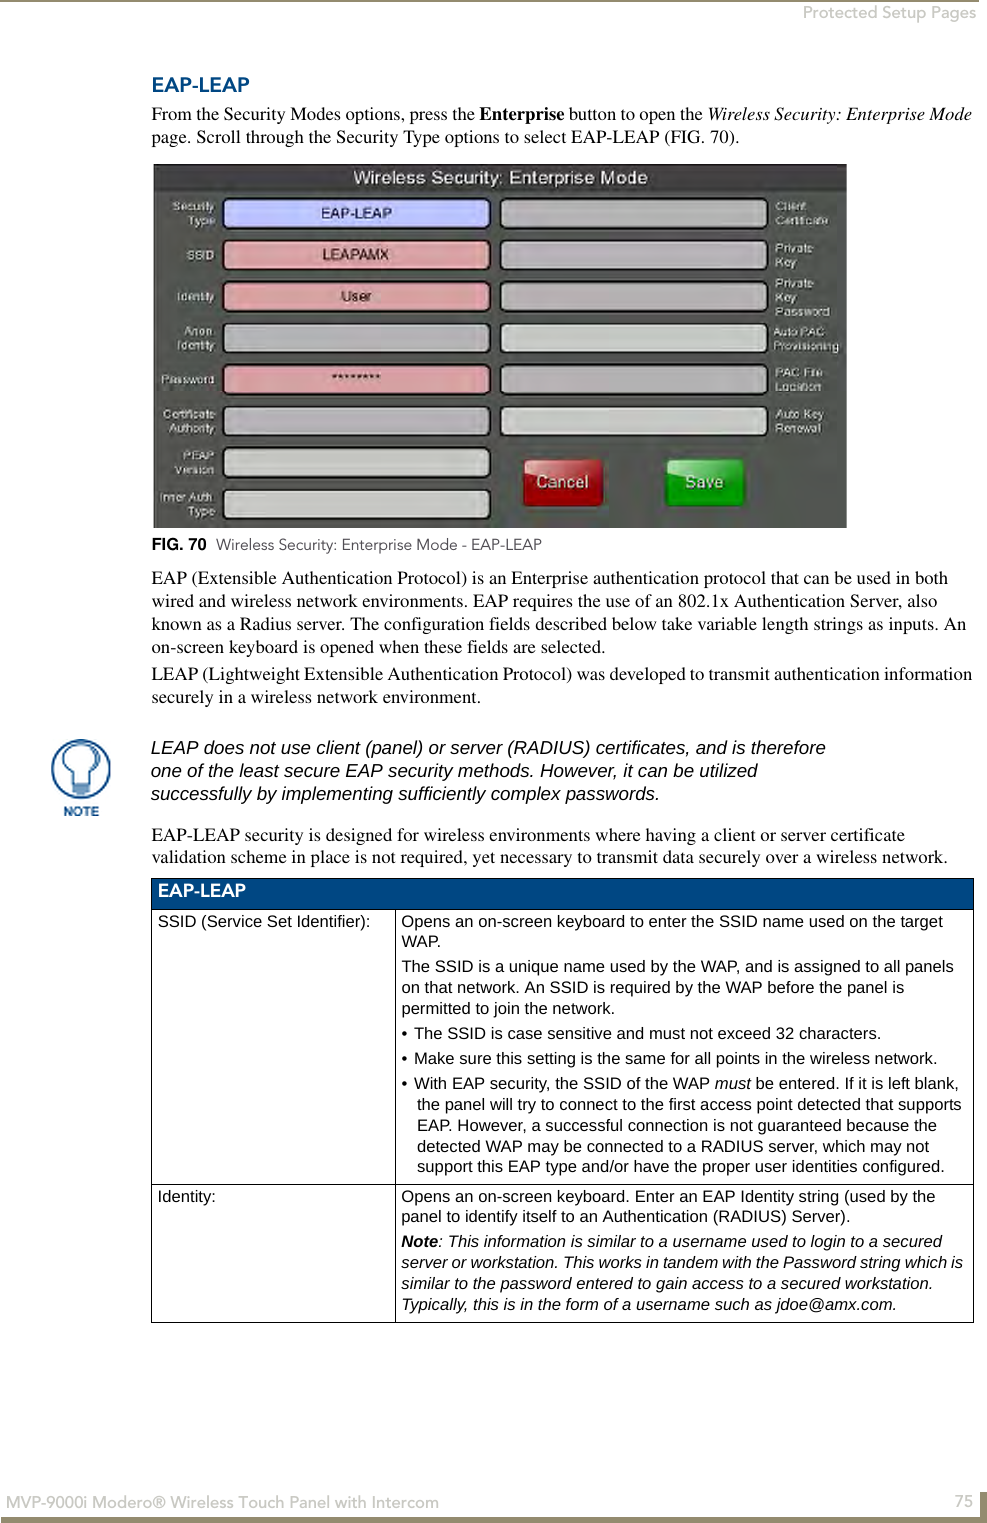 Protected Setup Pages75MVP-9000i Modero® Wireless Touch Panel with IntercomEAP-LEAPFrom the Security Modes options, press the Enterprise button to open the Wireless Security: Enterprise Mode page. Scroll through the Security Type options to select EAP-LEAP (FIG. 70). EAP (Extensible Authentication Protocol) is an Enterprise authentication protocol that can be used in both wired and wireless network environments. EAP requires the use of an 802.1x Authentication Server, also known as a Radius server. The configuration fields described below take variable length strings as inputs. An on-screen keyboard is opened when these fields are selected.LEAP (Lightweight Extensible Authentication Protocol) was developed to transmit authentication information securely in a wireless network environment.EAP-LEAP security is designed for wireless environments where having a client or server certificate validation scheme in place is not required, yet necessary to transmit data securely over a wireless network.  FIG. 70  Wireless Security: Enterprise Mode - EAP-LEAPLEAP does not use client (panel) or server (RADIUS) certificates, and is therefore one of the least secure EAP security methods. However, it can be utilized successfully by implementing sufficiently complex passwords.EAP-LEAPSSID (Service Set Identifier): Opens an on-screen keyboard to enter the SSID name used on the target WAP. The SSID is a unique name used by the WAP, and is assigned to all panels on that network. An SSID is required by the WAP before the panel is permitted to join the network. • The SSID is case sensitive and must not exceed 32 characters. • Make sure this setting is the same for all points in the wireless network.• With EAP security, the SSID of the WAP must be entered. If it is left blank, the panel will try to connect to the first access point detected that supports EAP. However, a successful connection is not guaranteed because the detected WAP may be connected to a RADIUS server, which may not support this EAP type and/or have the proper user identities configured.Identity: Opens an on-screen keyboard. Enter an EAP Identity string (used by the panel to identify itself to an Authentication (RADIUS) Server). Note: This information is similar to a username used to login to a secured server or workstation. This works in tandem with the Password string which is similar to the password entered to gain access to a secured workstation. Typically, this is in the form of a username such as jdoe@amx.com.